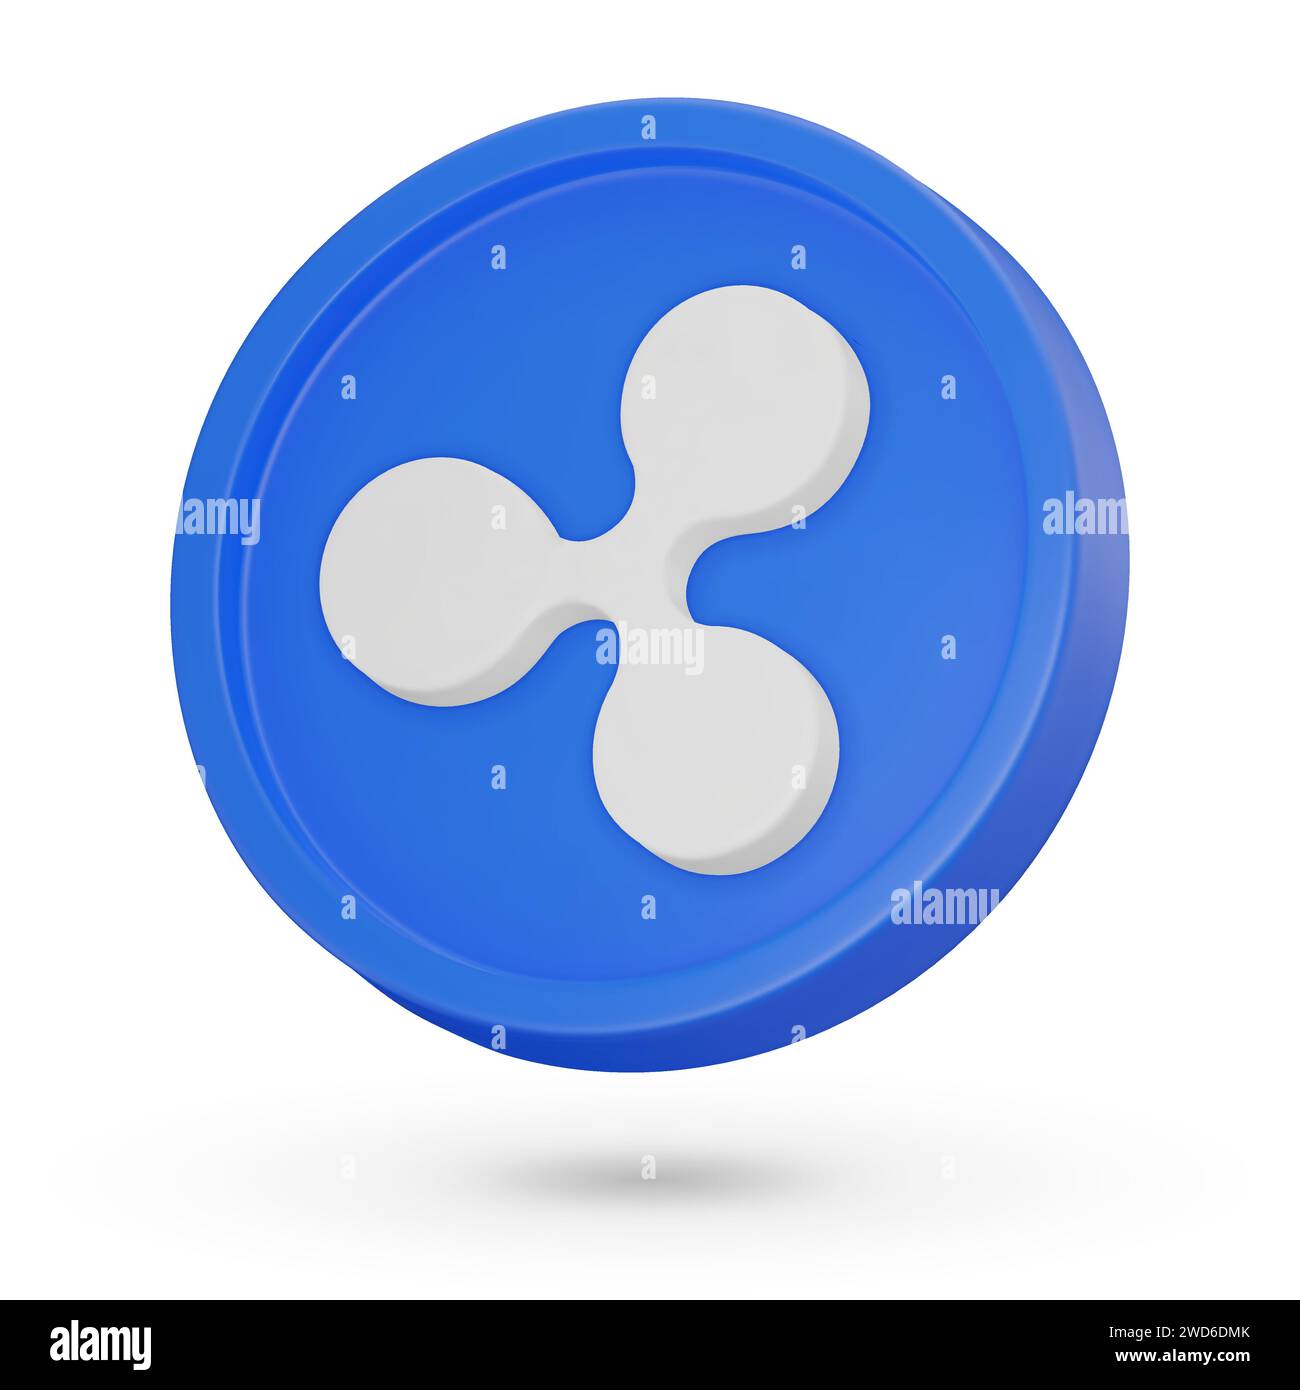 3D coin. Cryptocurrency symbol Ripple XPR. 3D Vector icon. Illustration isolated on a white background. Stock Vector